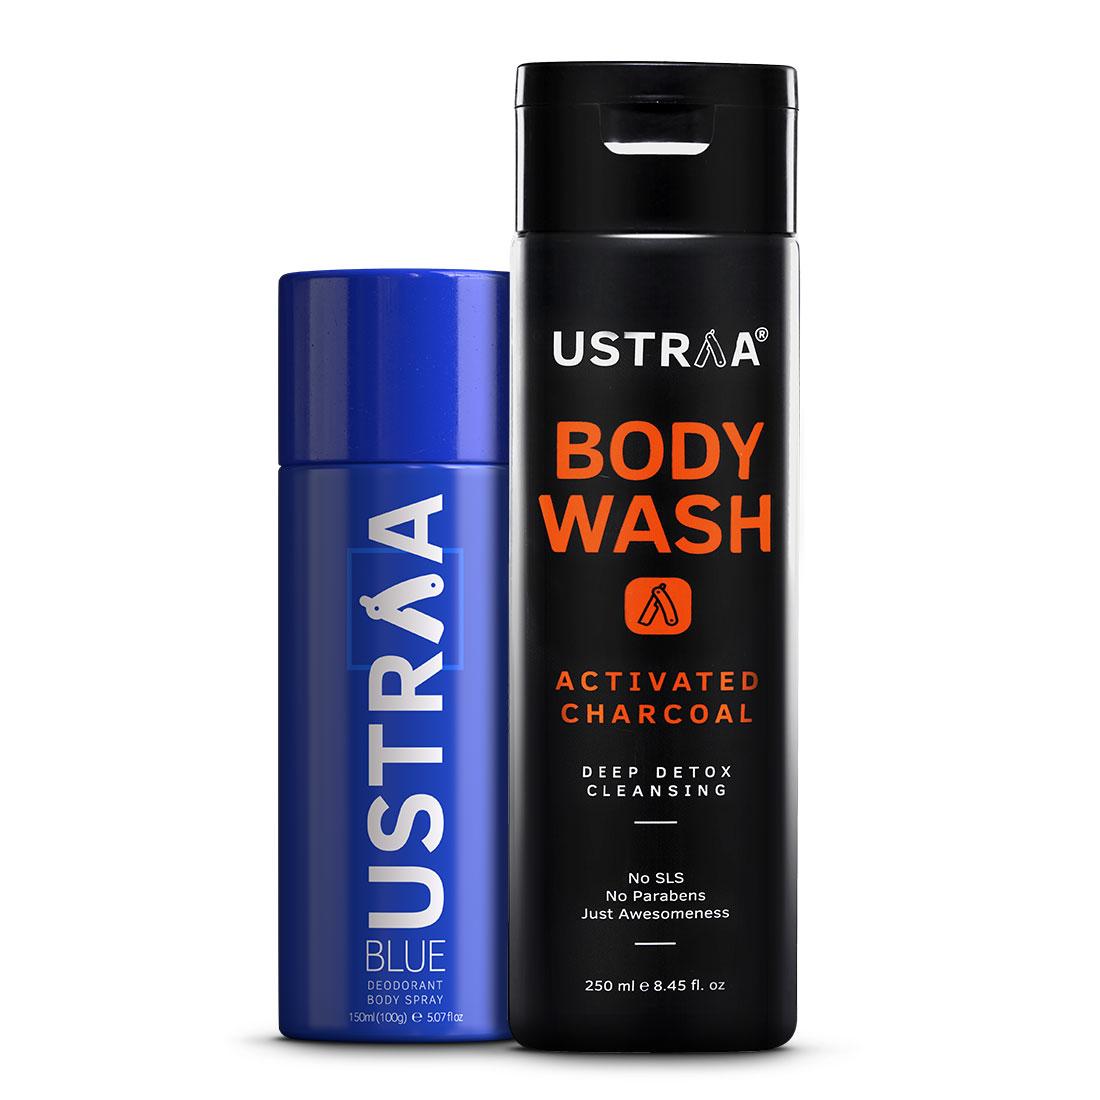 Ustraa Ultimate Combo For Men: Deodorant Blue + Body Wash Activated Charcoal